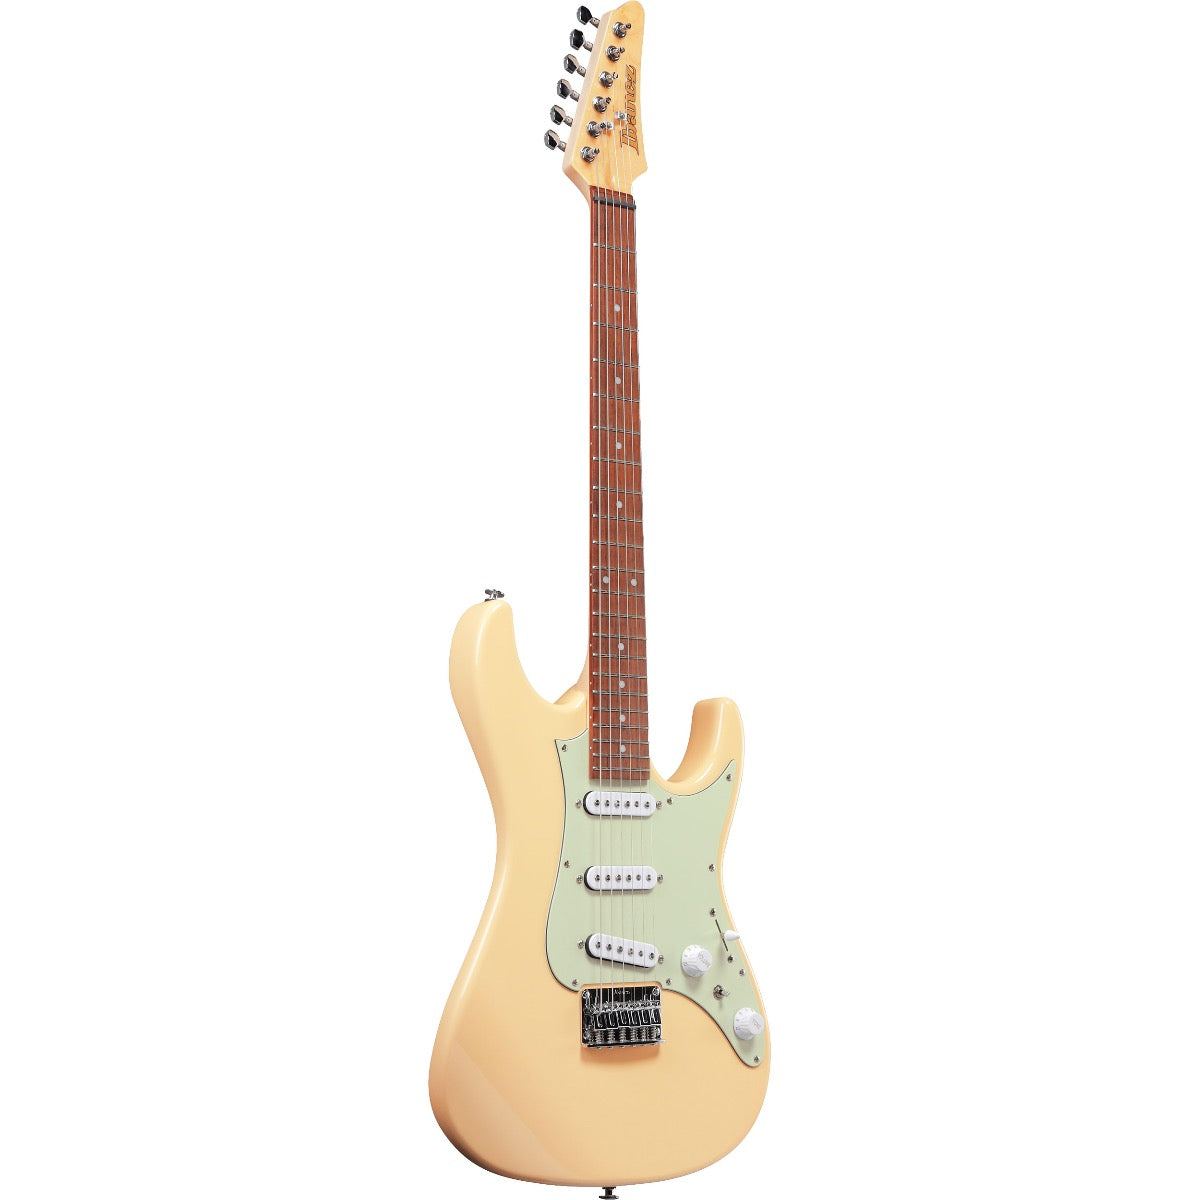 Perspective view of Ibanez AZES31 Electric Guitar - Ivory showing top and left side